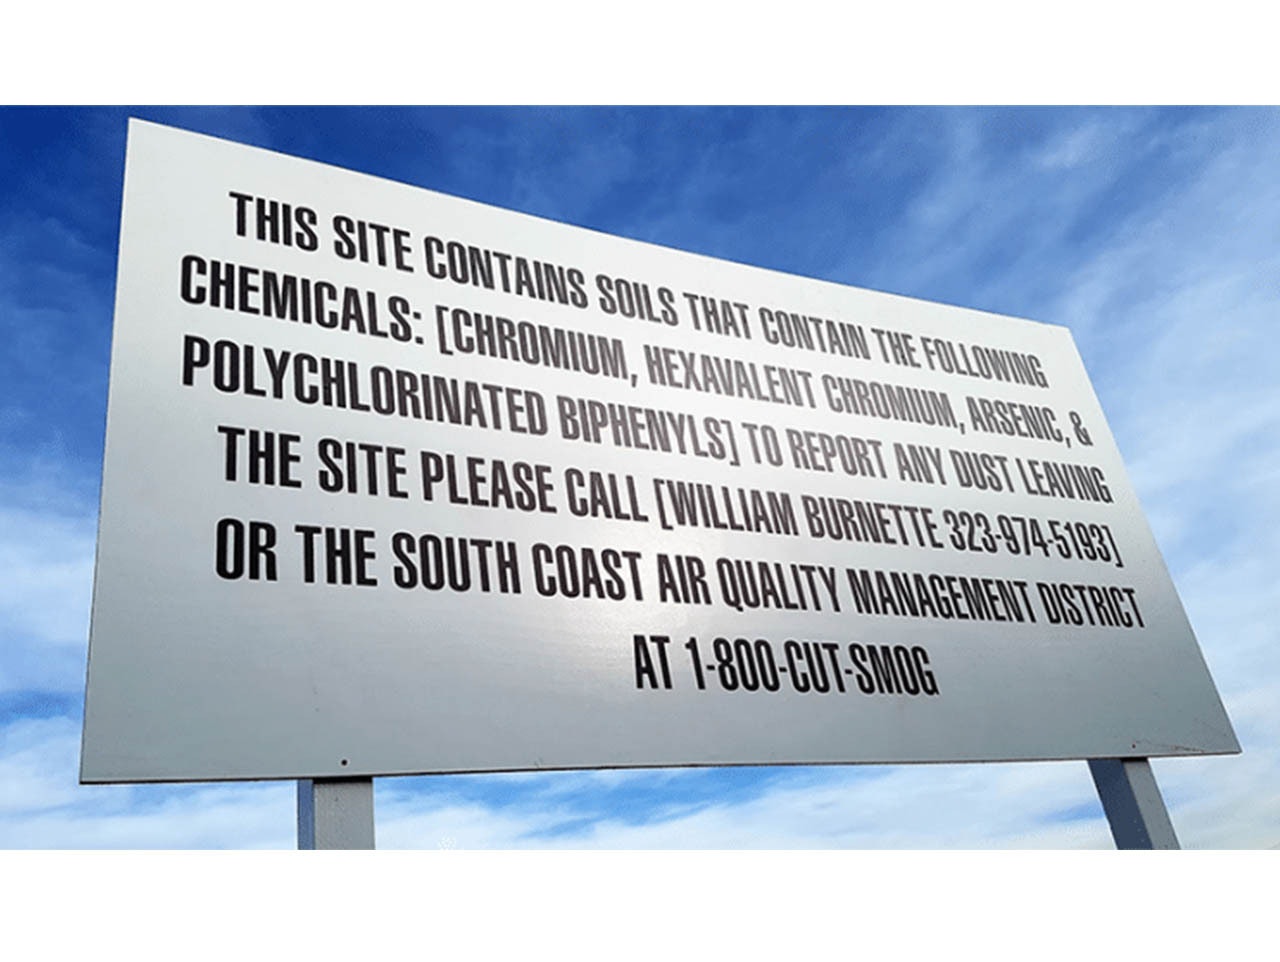 A SCAQMD-approved sign at the entrance of a remediation site in LA